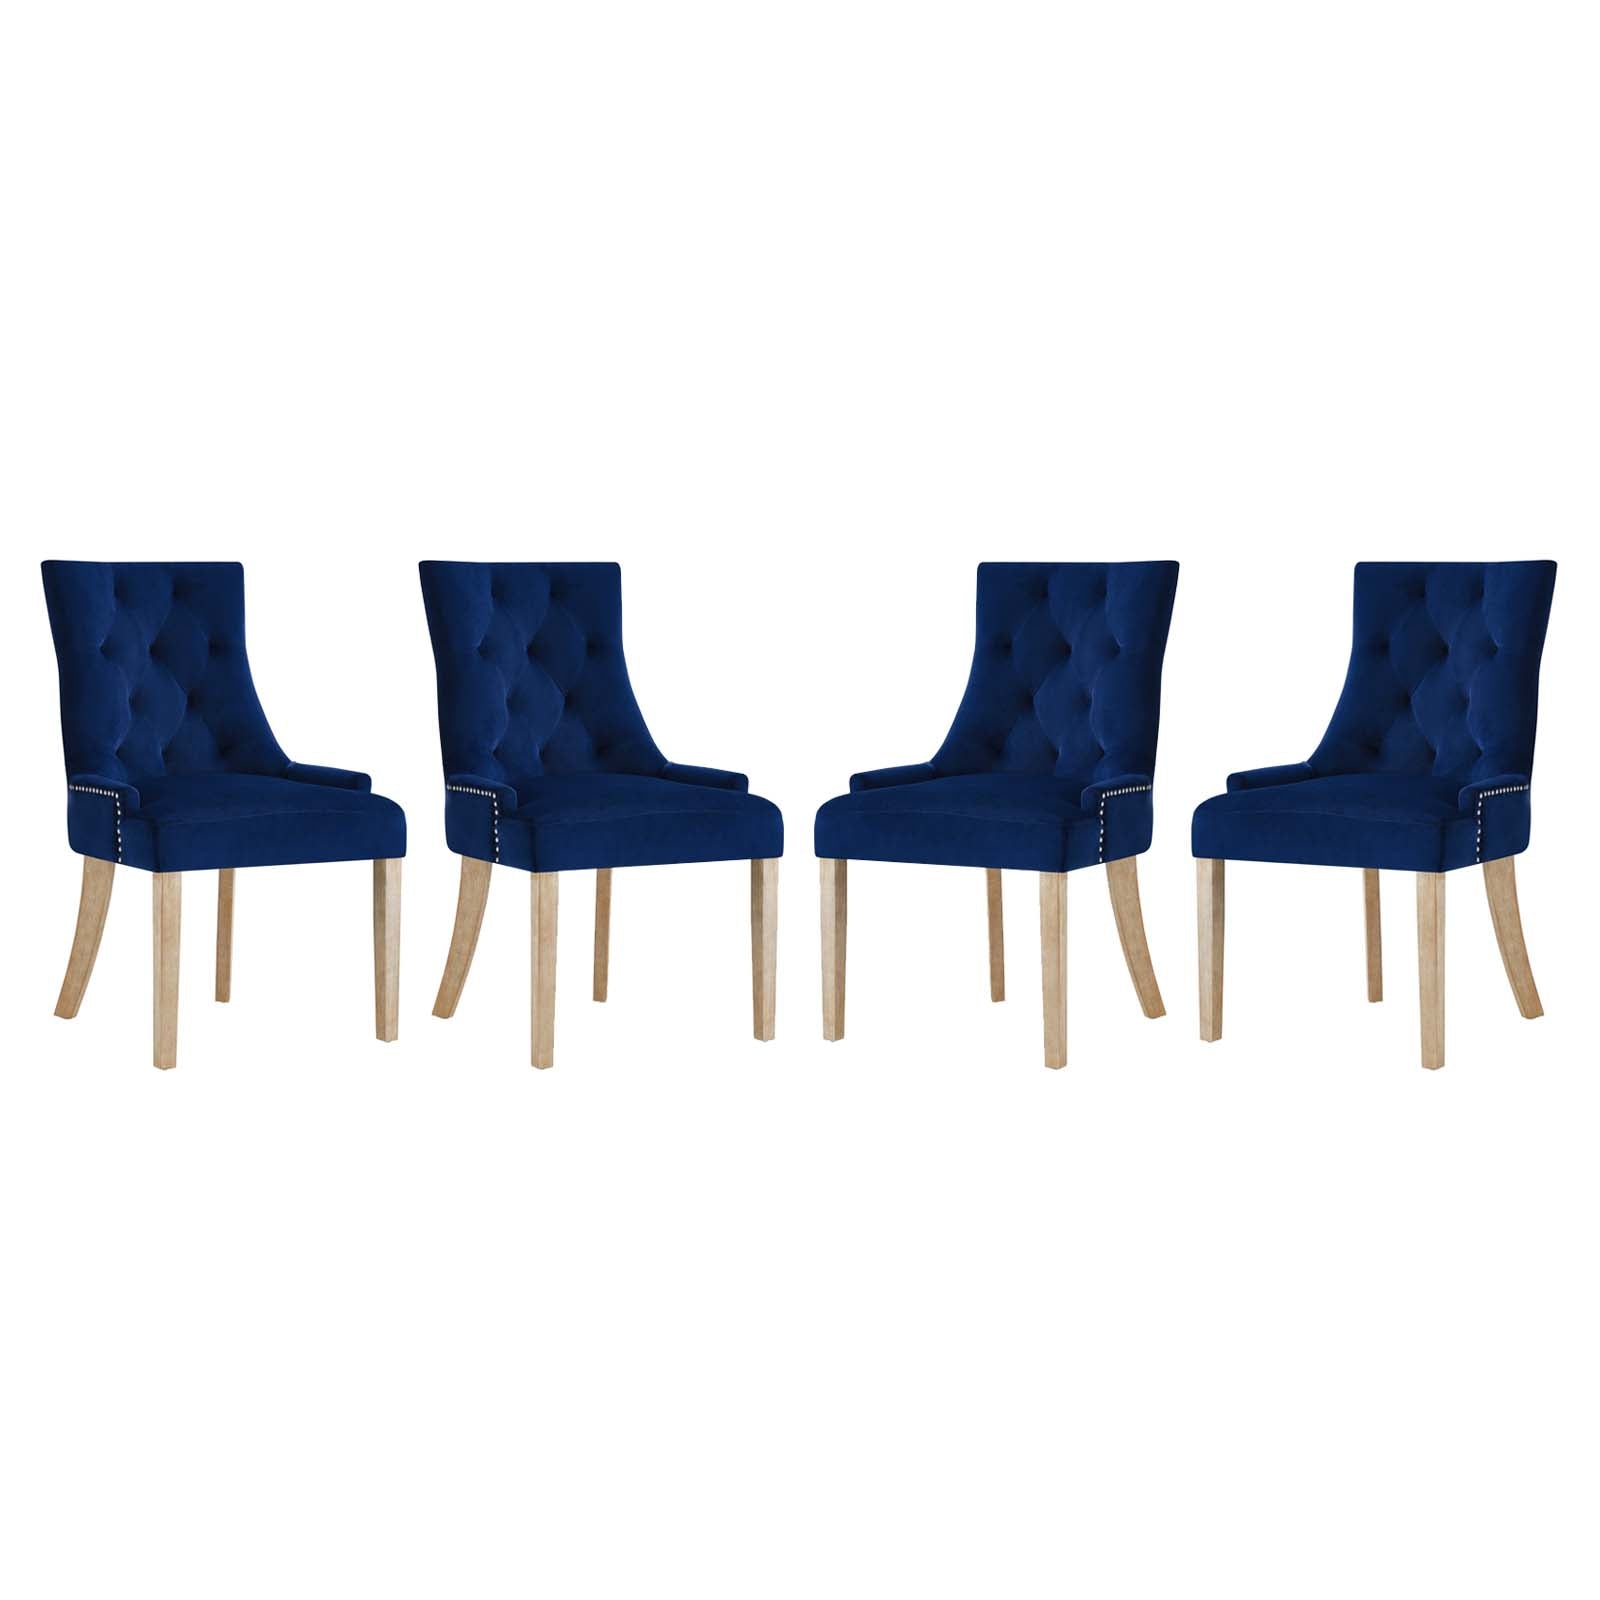 Modway Dining Chairs - Pose Dining Chair Performance Velvet Navy (Set of 4)